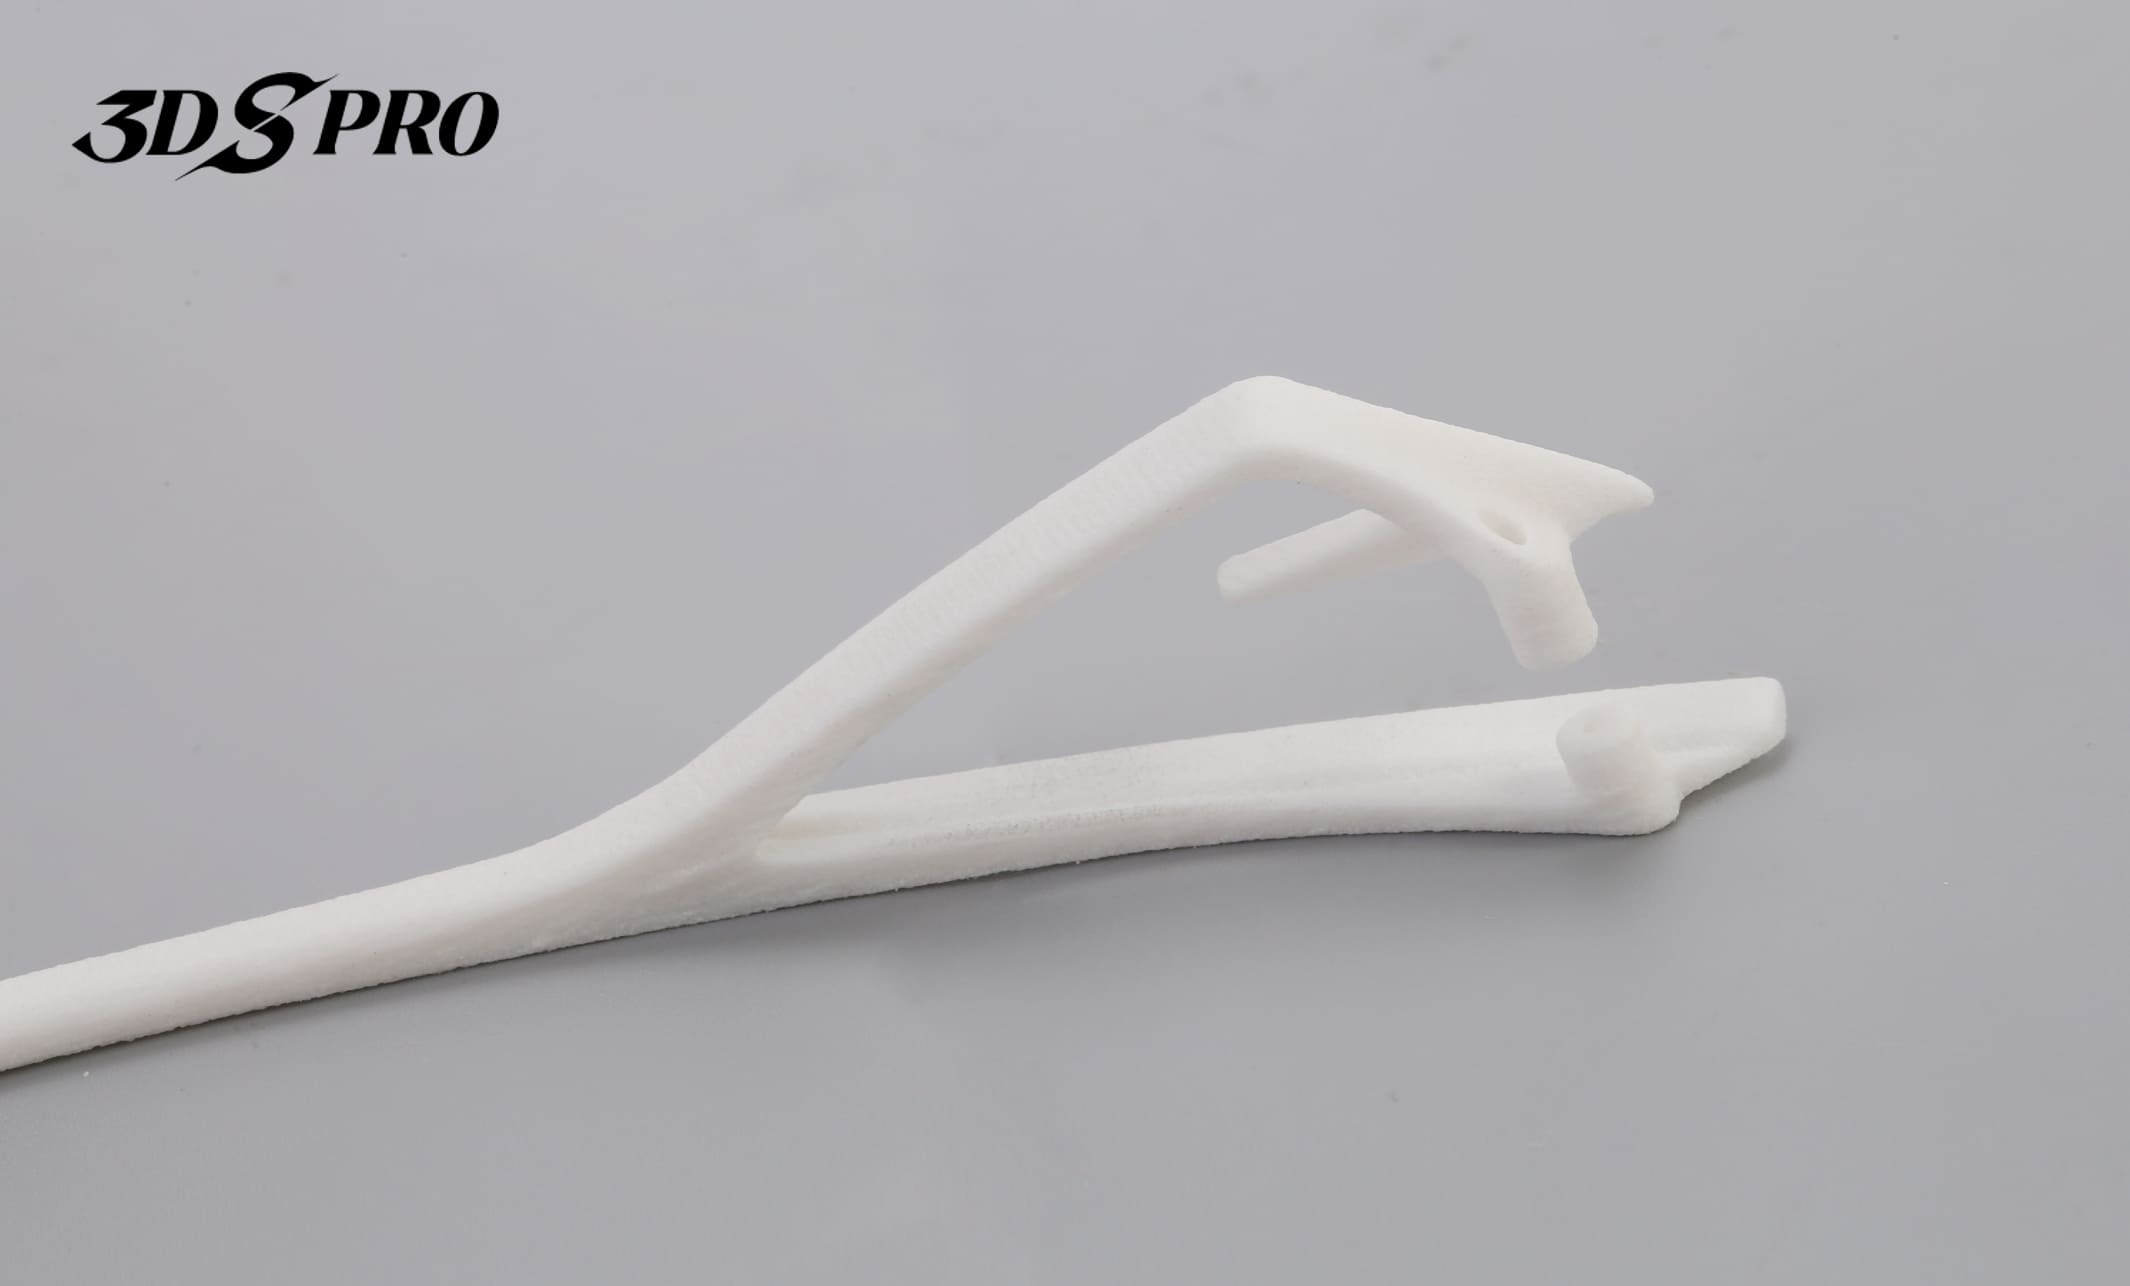 3DSPRO SLS 3D Printing Services and 3D+ Solutions-Vapor Smoothing